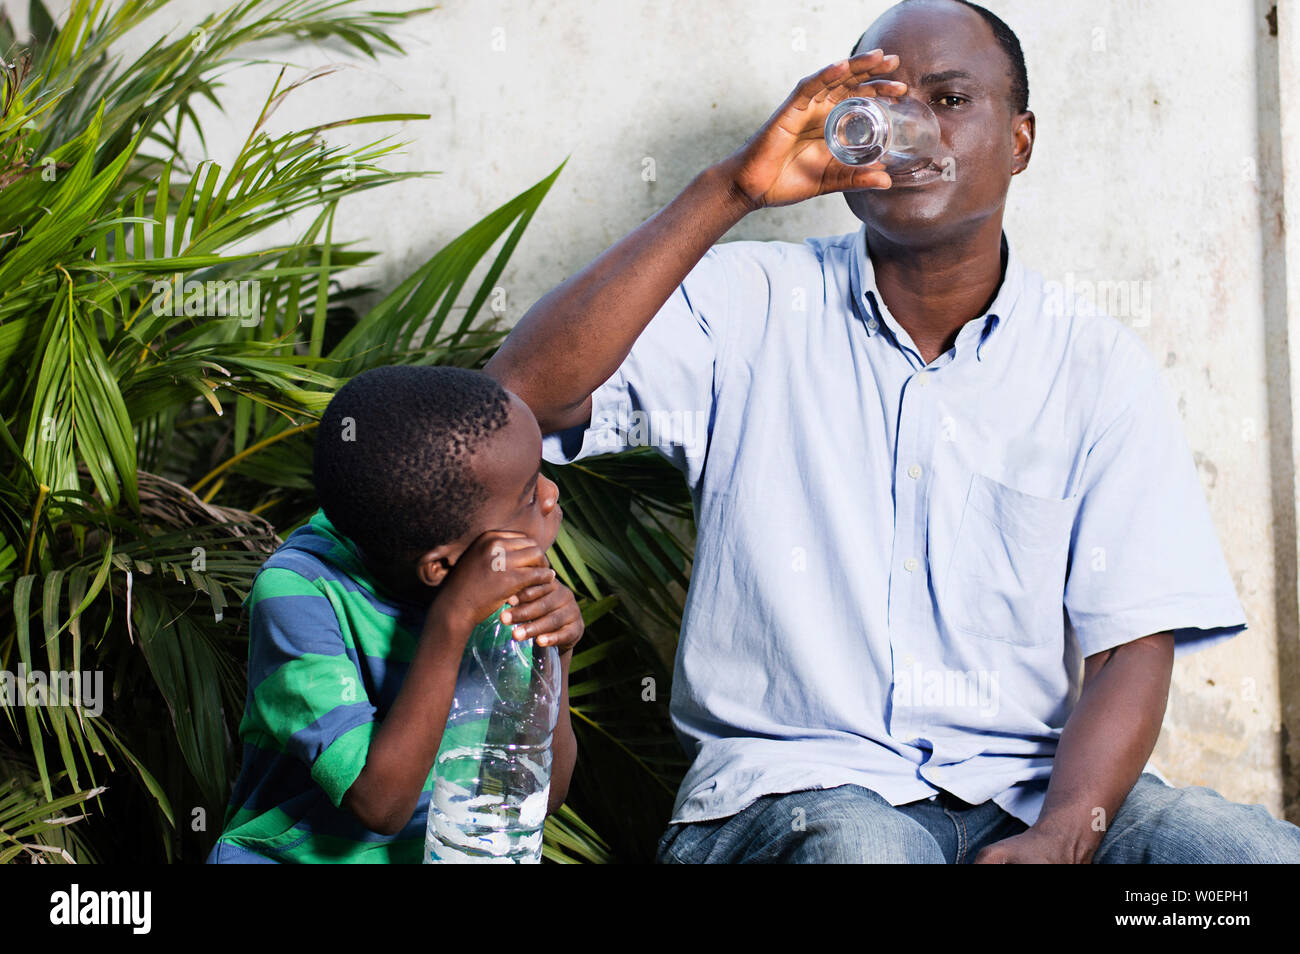 middle-aged man drinks water in a glass and child watching. Stock Photo